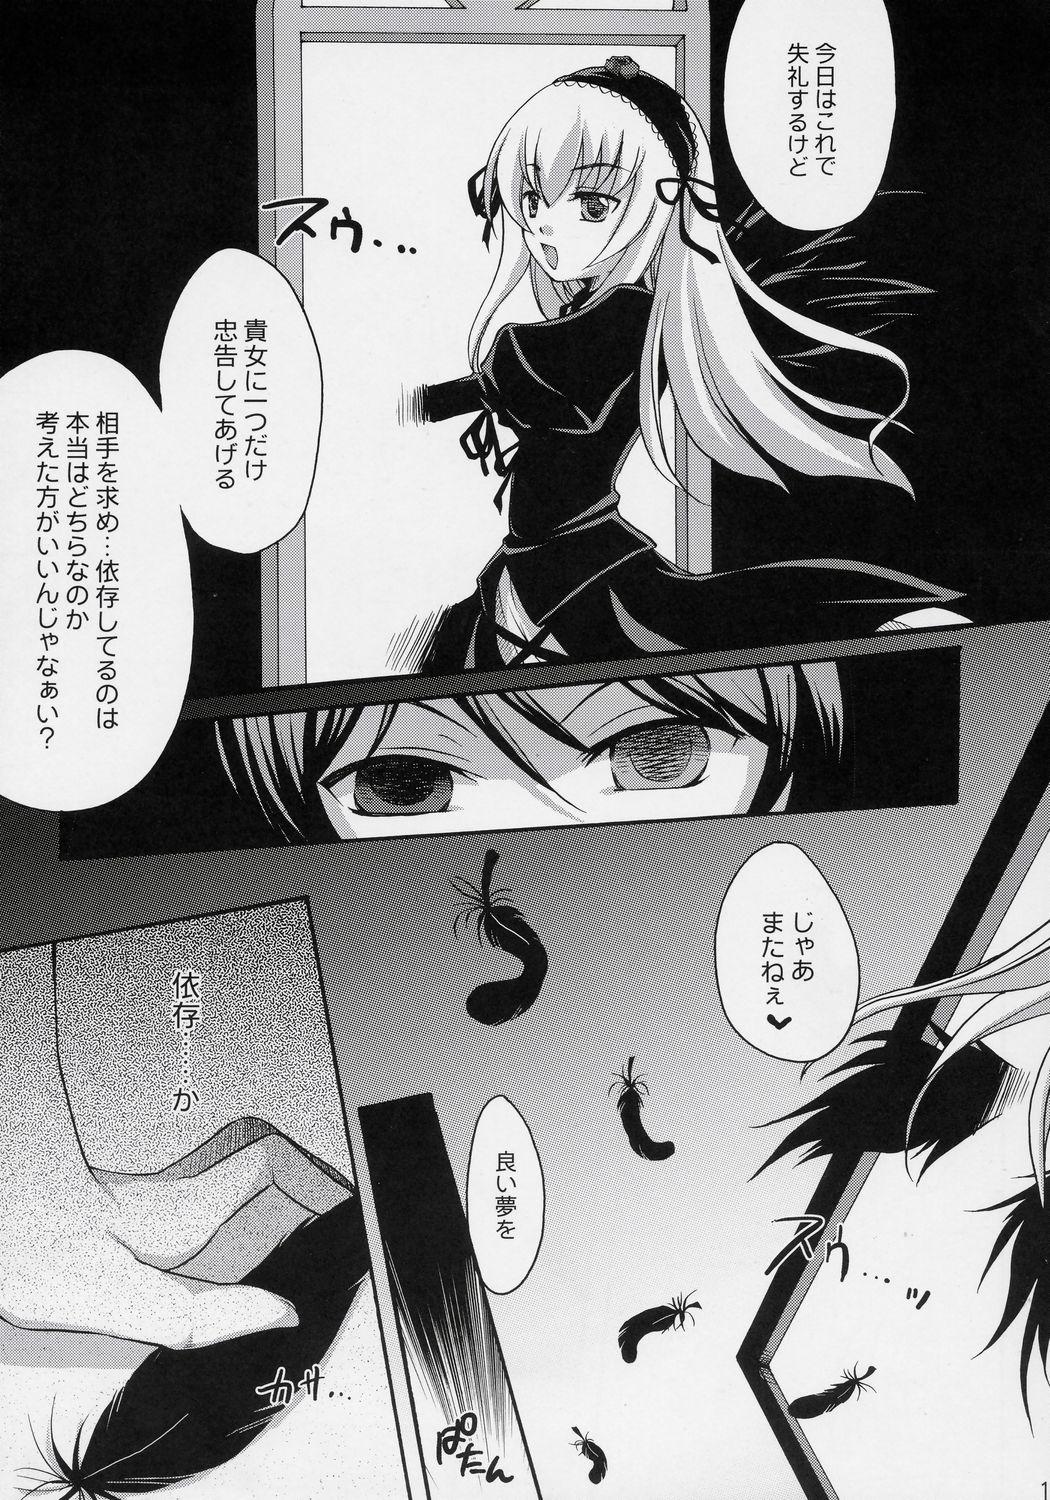 Oldvsyoung Ginshi no Ami - Rozen maiden Desperate - Page 12